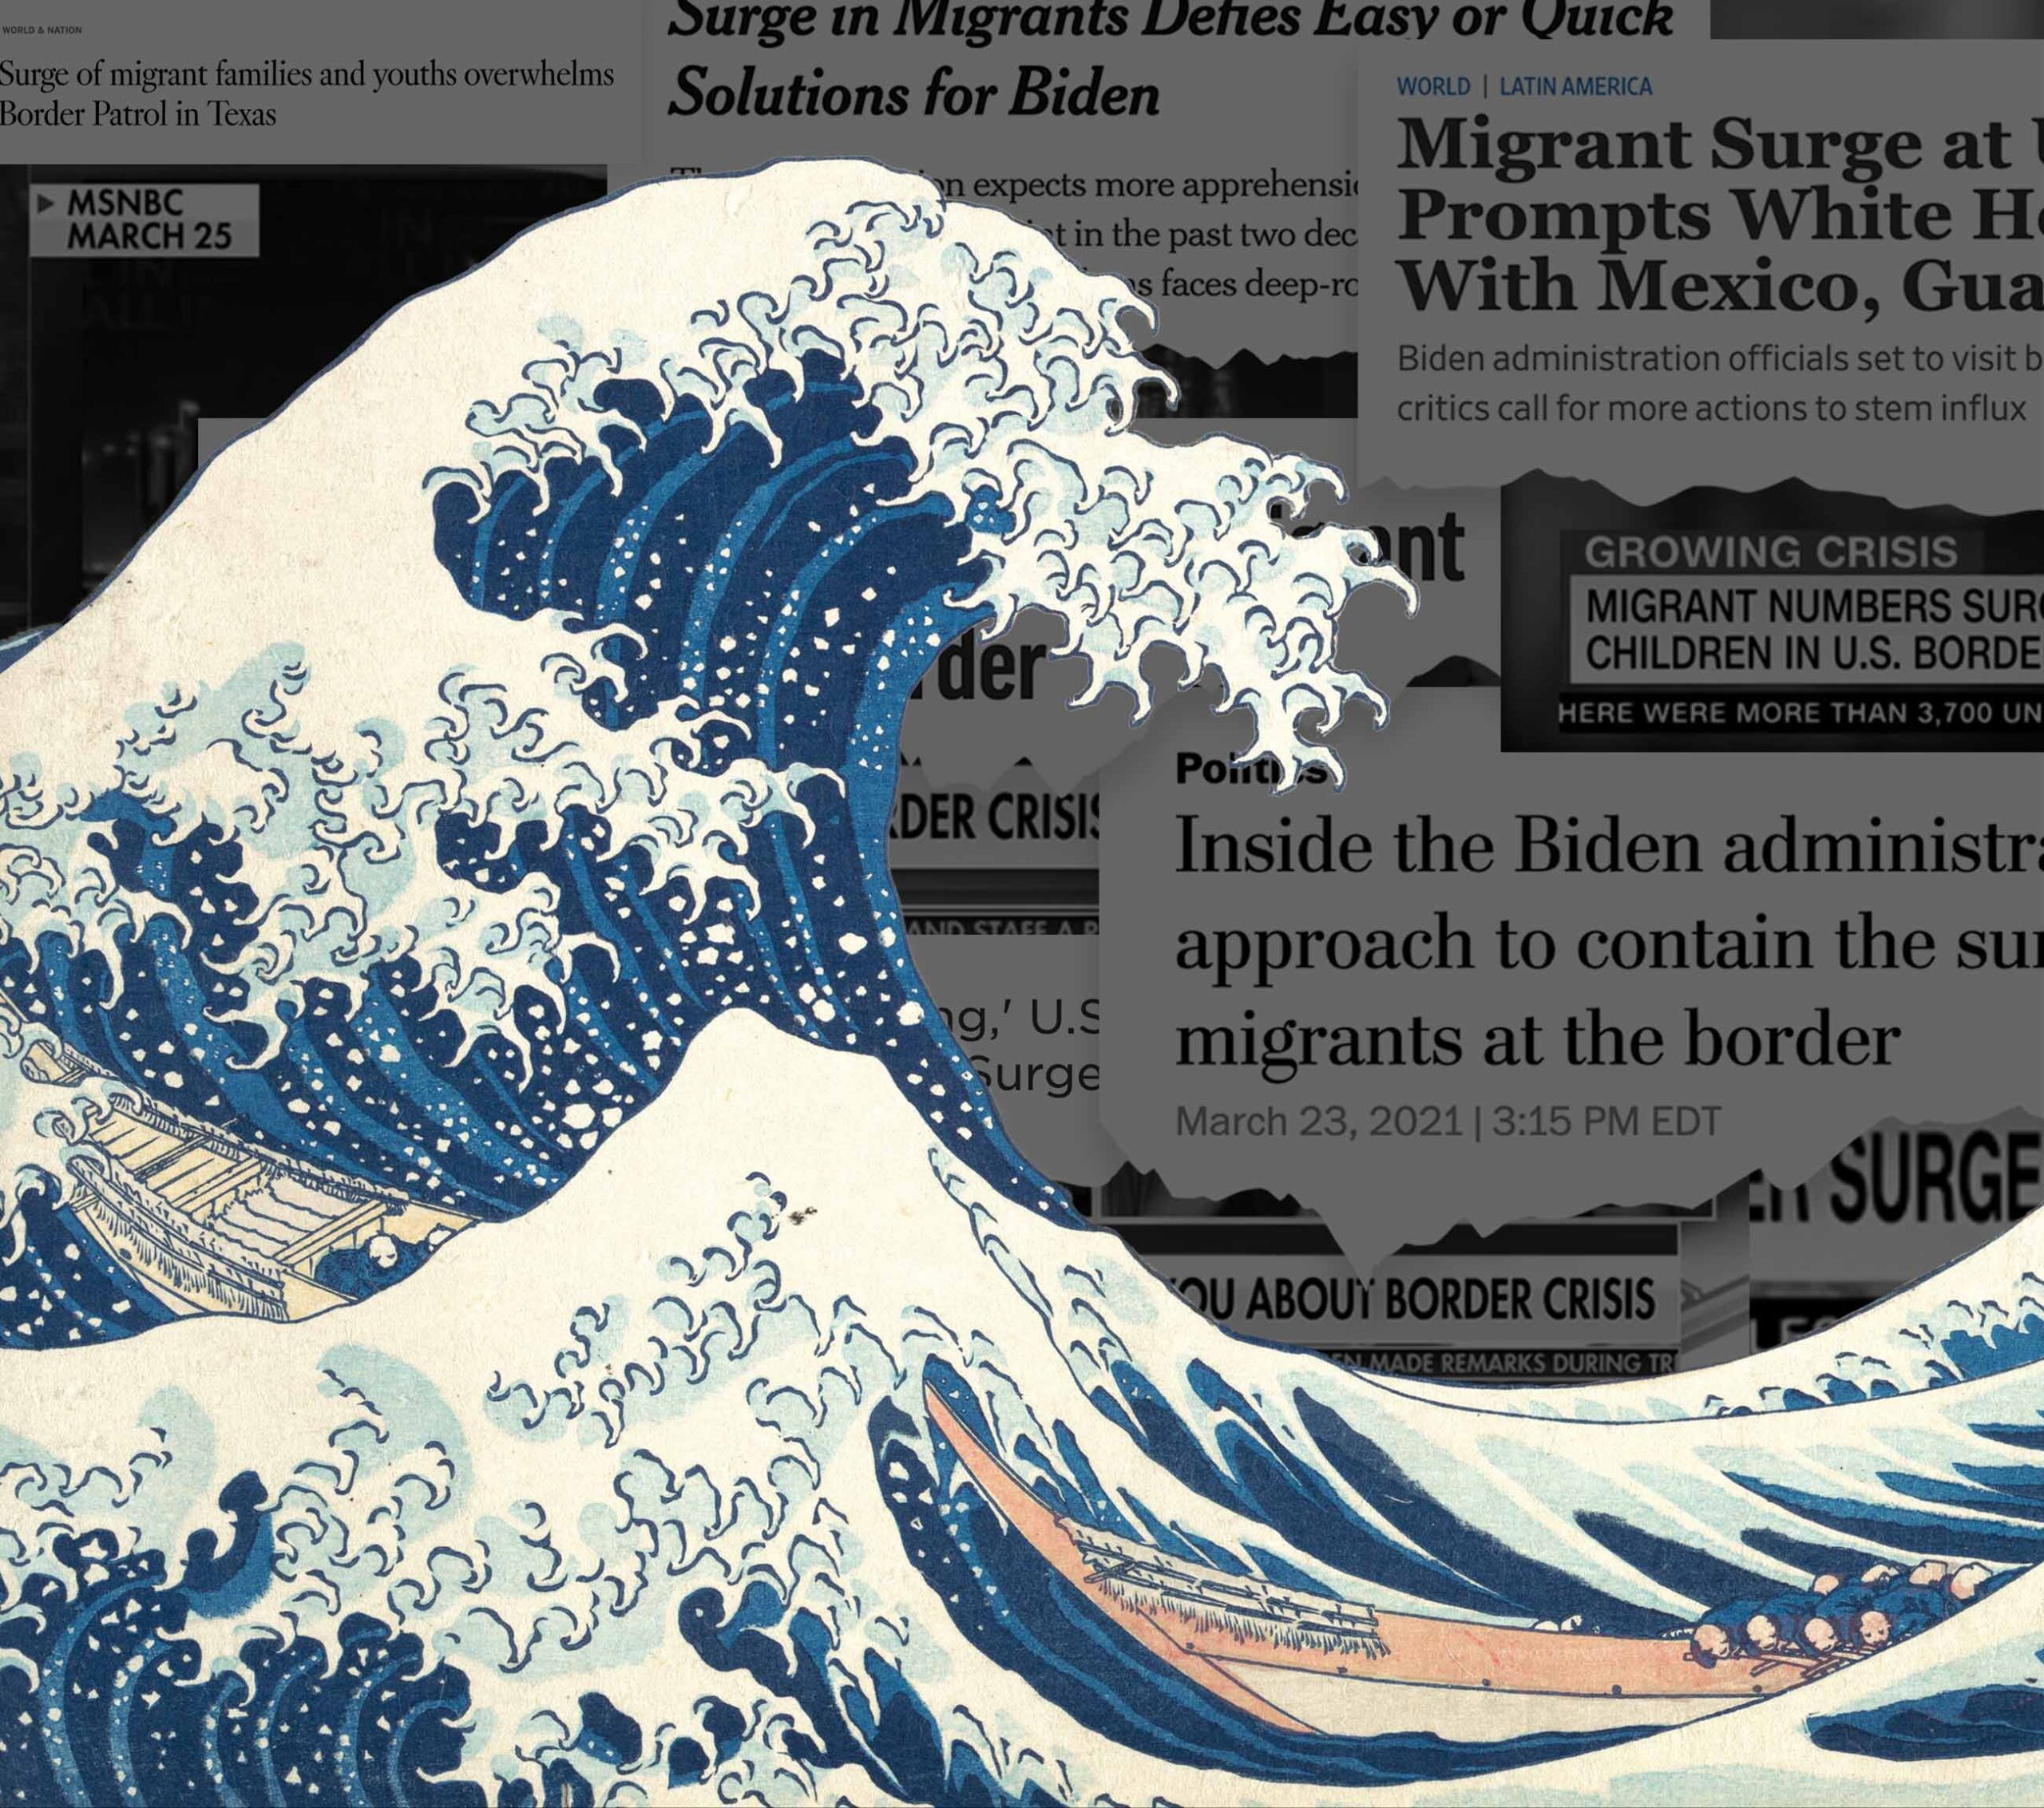 An ocean wave looms over several news headlines mentioning 'migrants', 'surge' and 'crisis'.